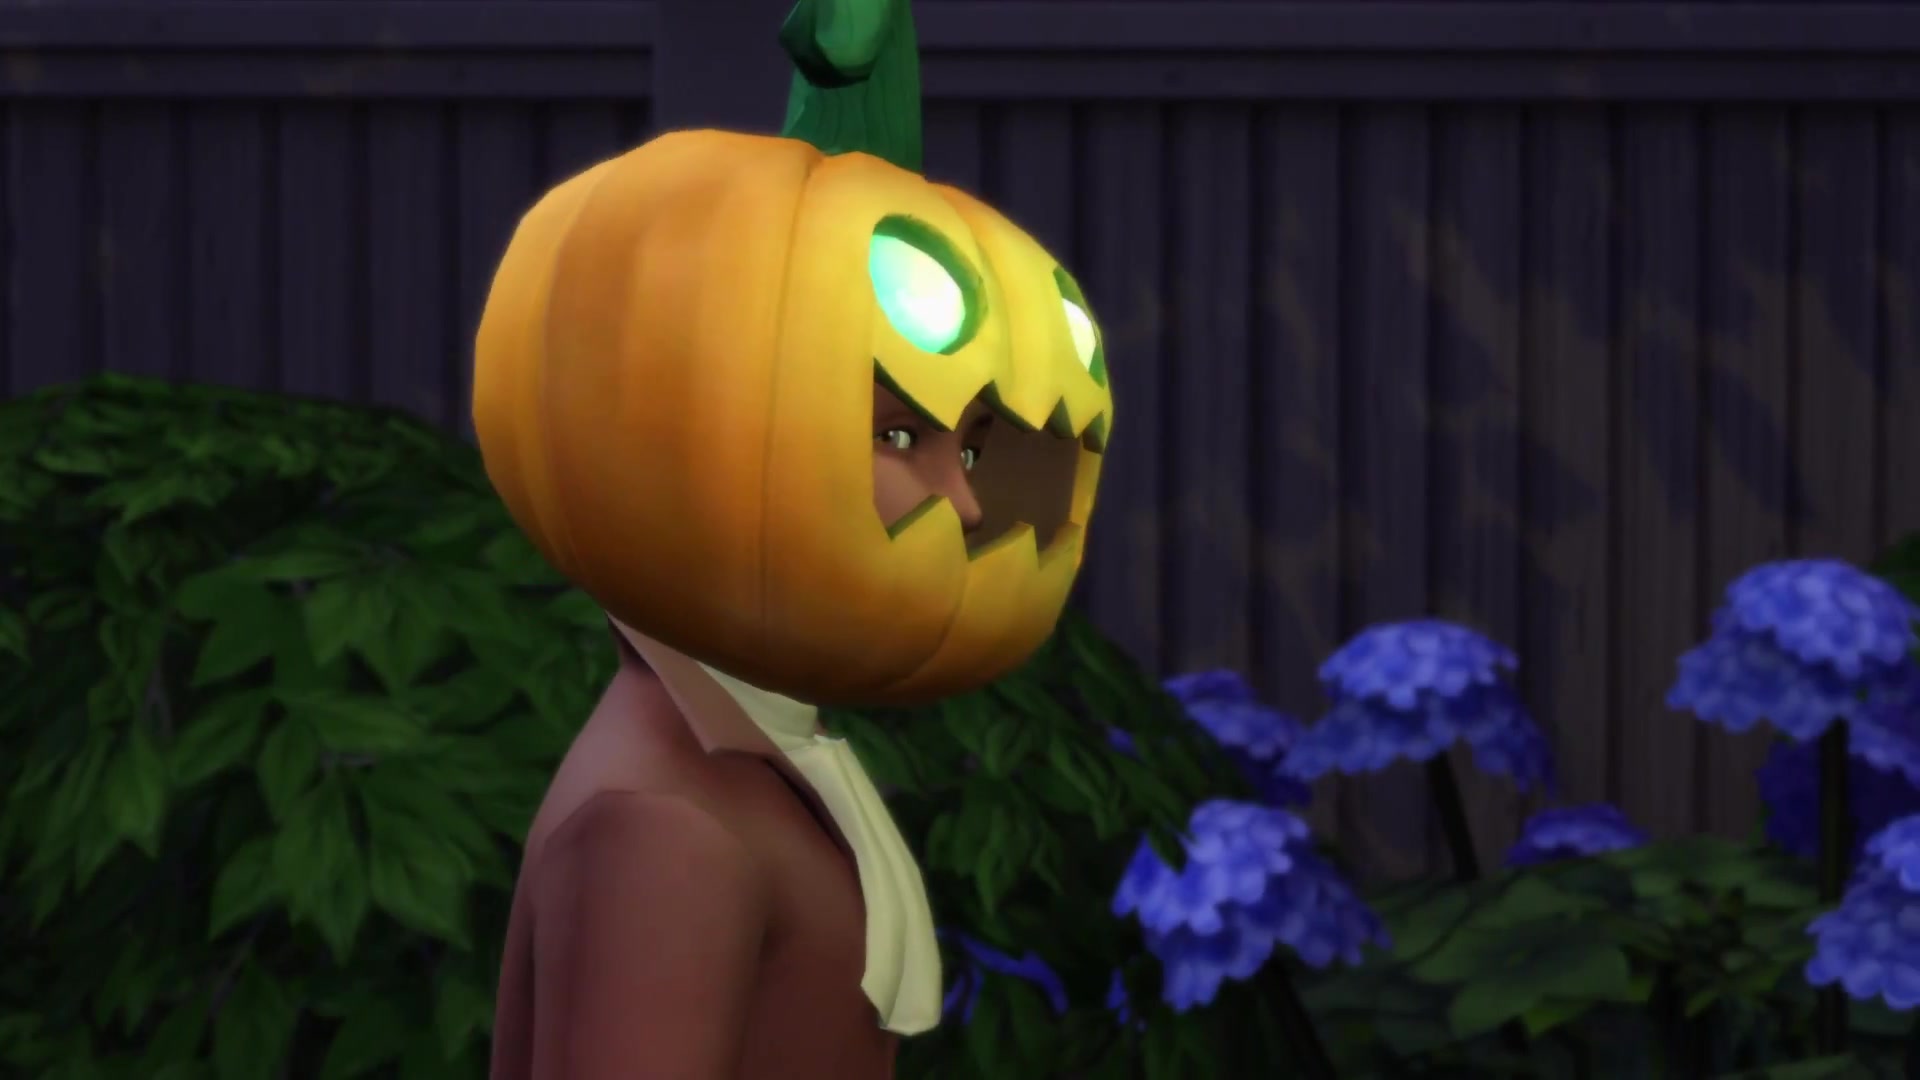 The Sims 4 Spooky Stuff- Official Trailer 0095 | SimsVIP